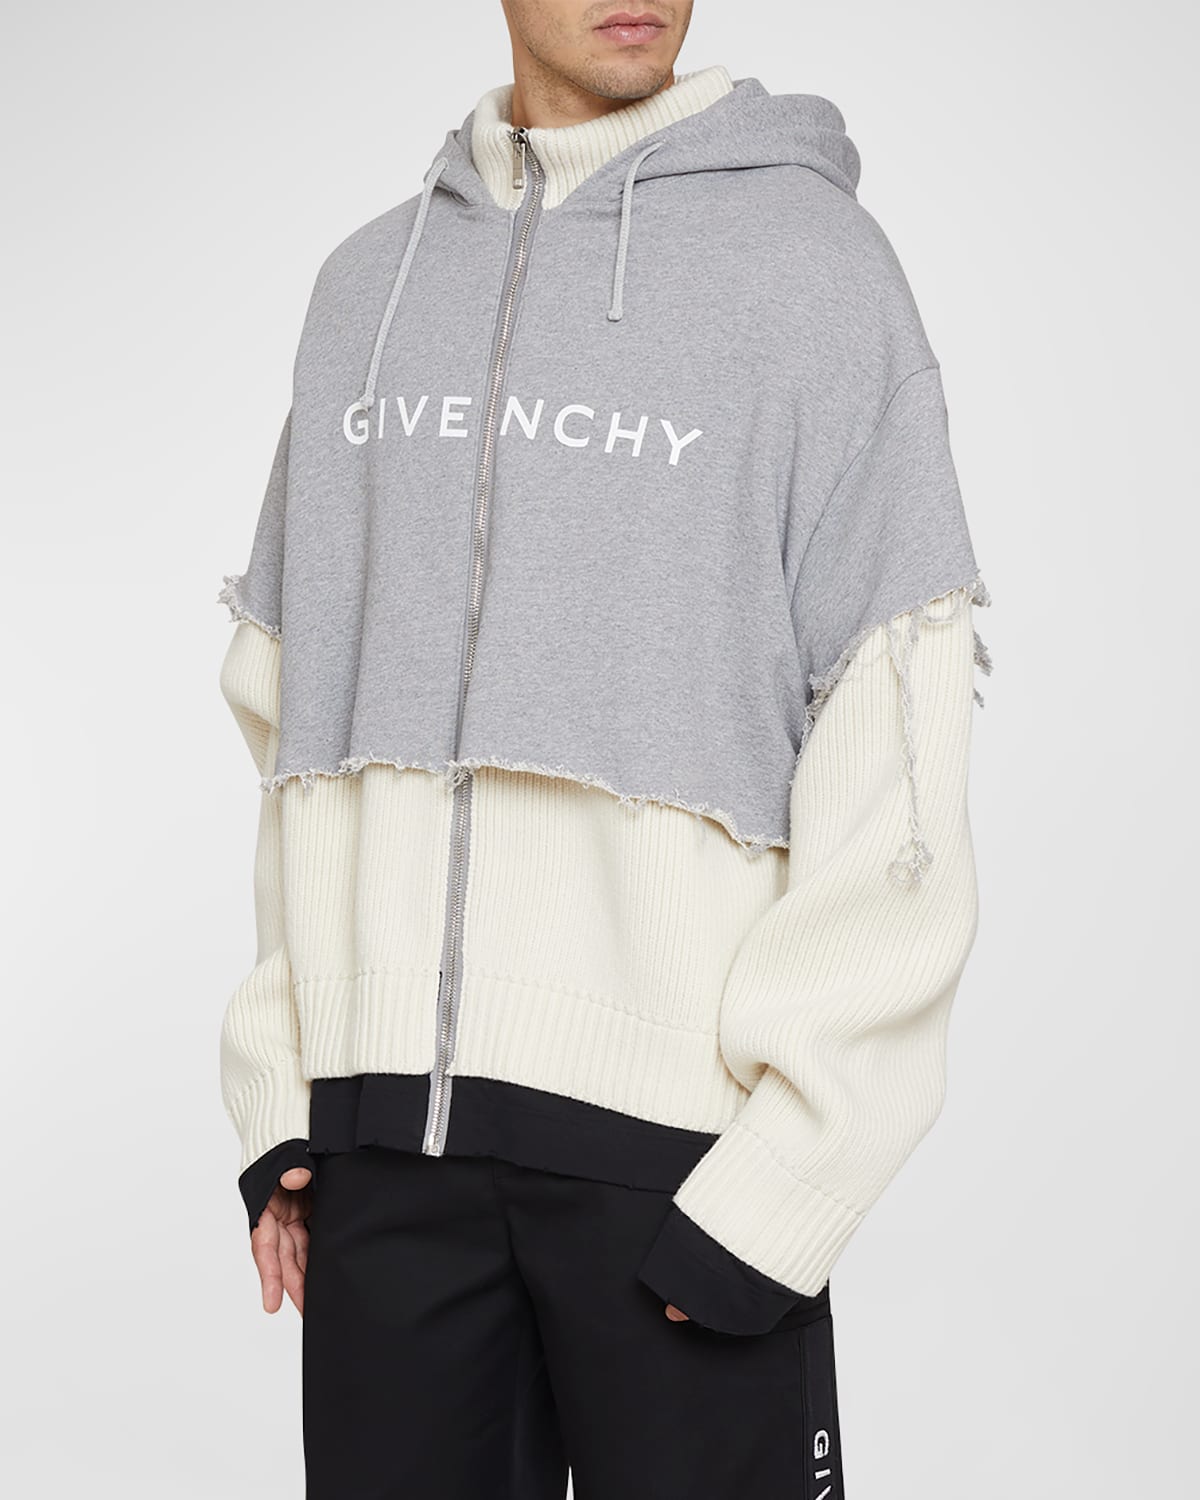 GIVENCHY MEN'S DOUBLE-LAYER ZIP HOODIE